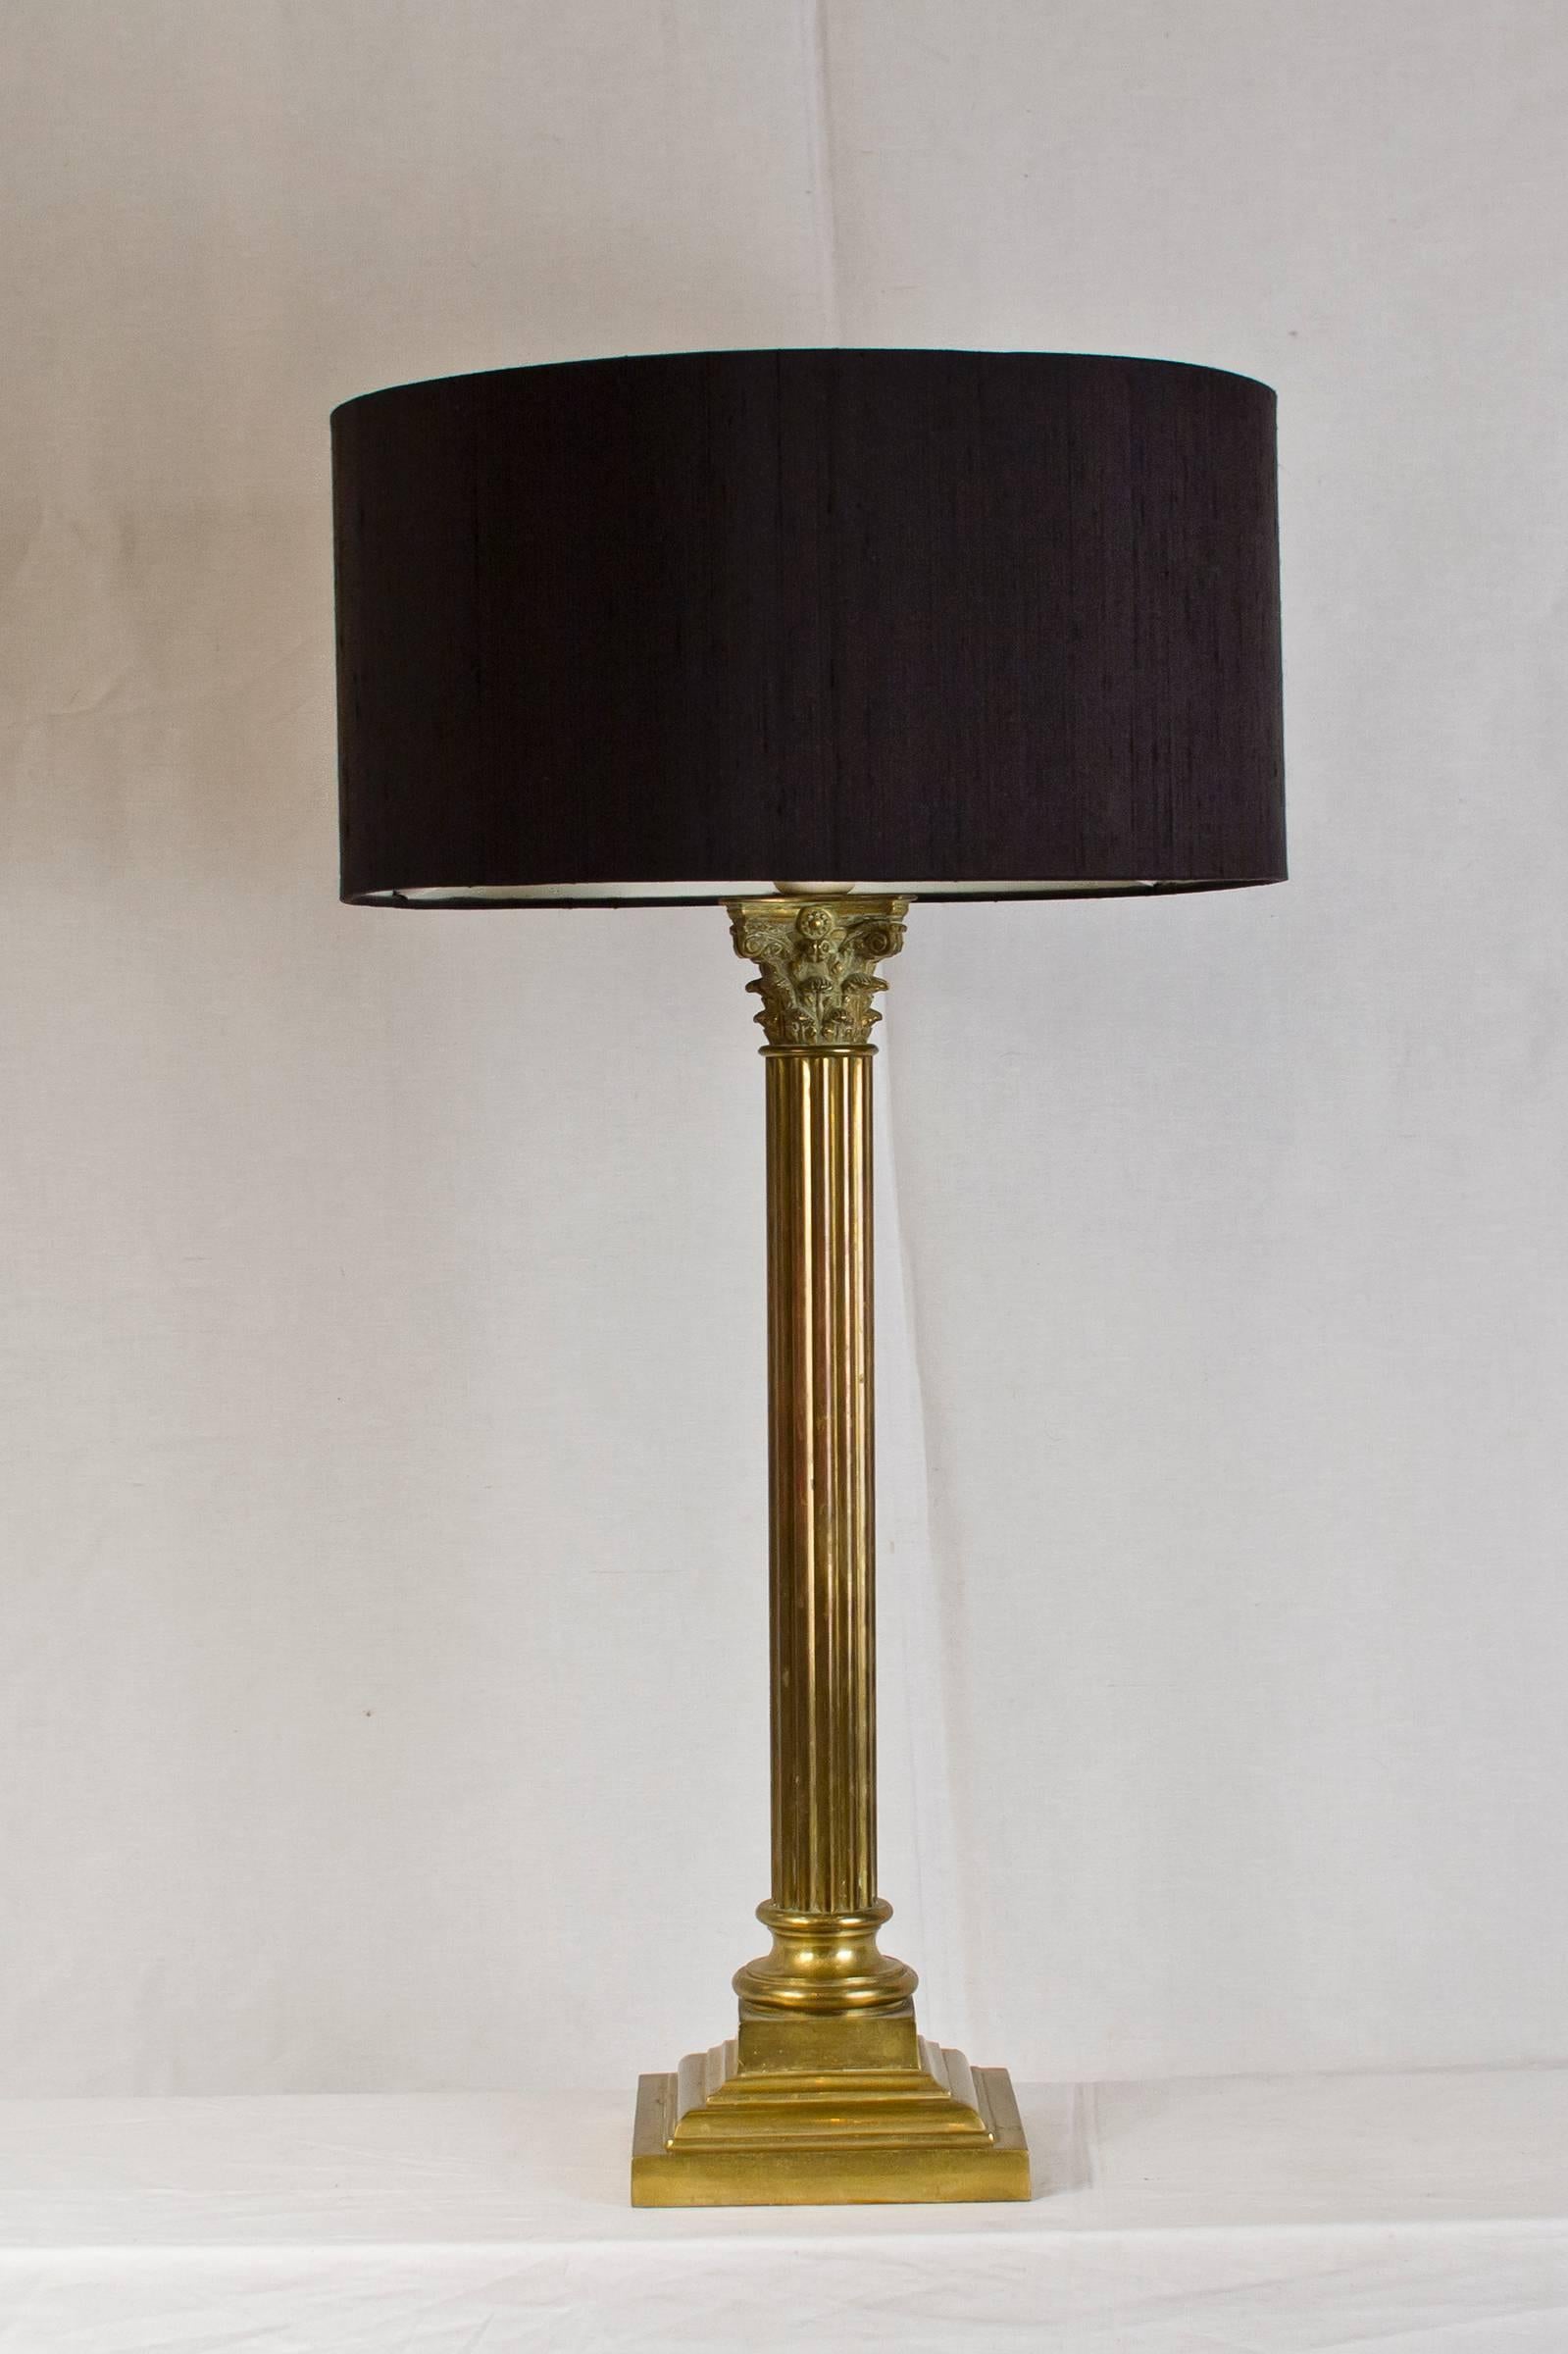 French column brass lamp.

Please contact us for delivery details.